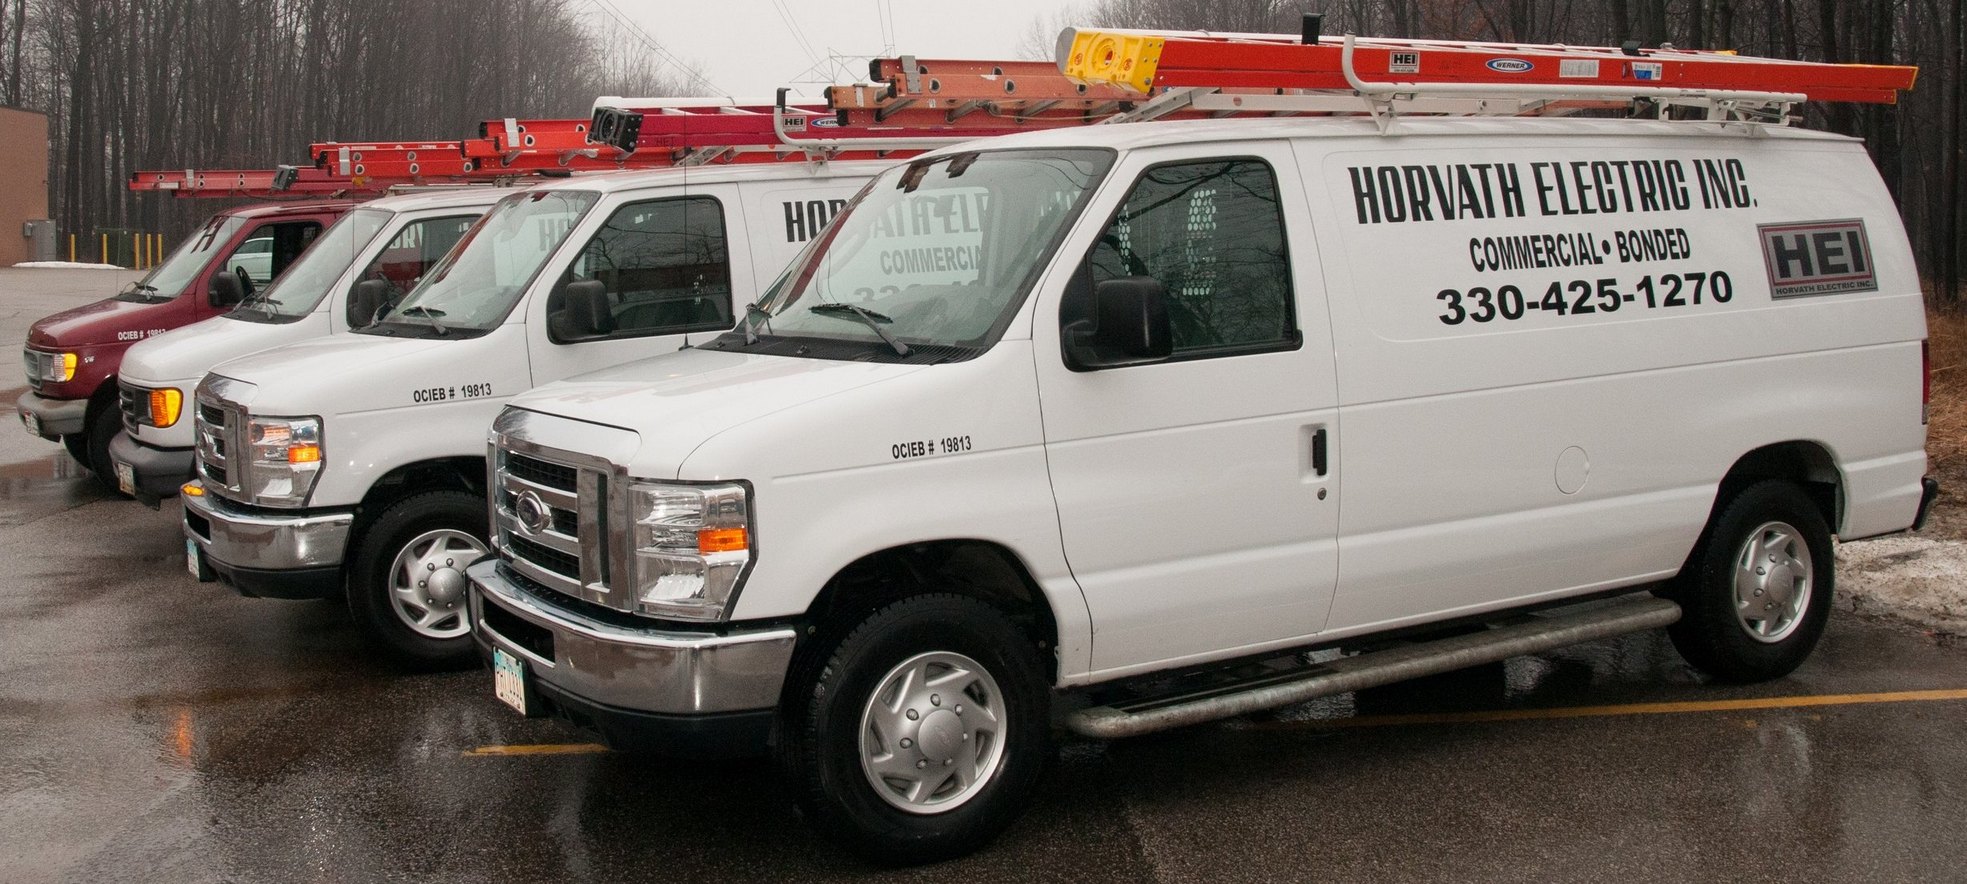 a photo of horvath electric's service vans